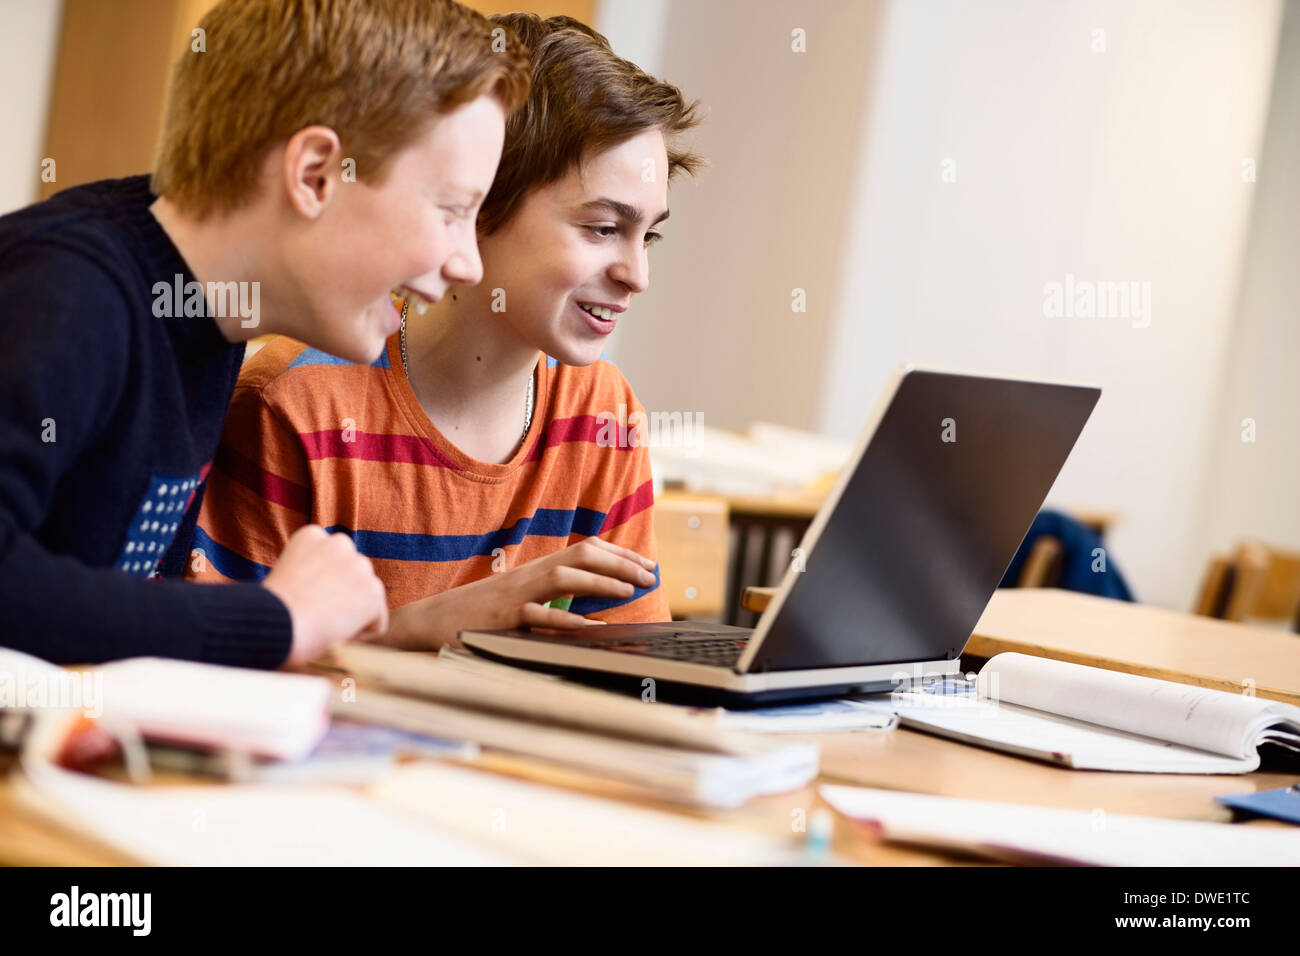 Schoolboys using laptop together in classroom Stock Photo